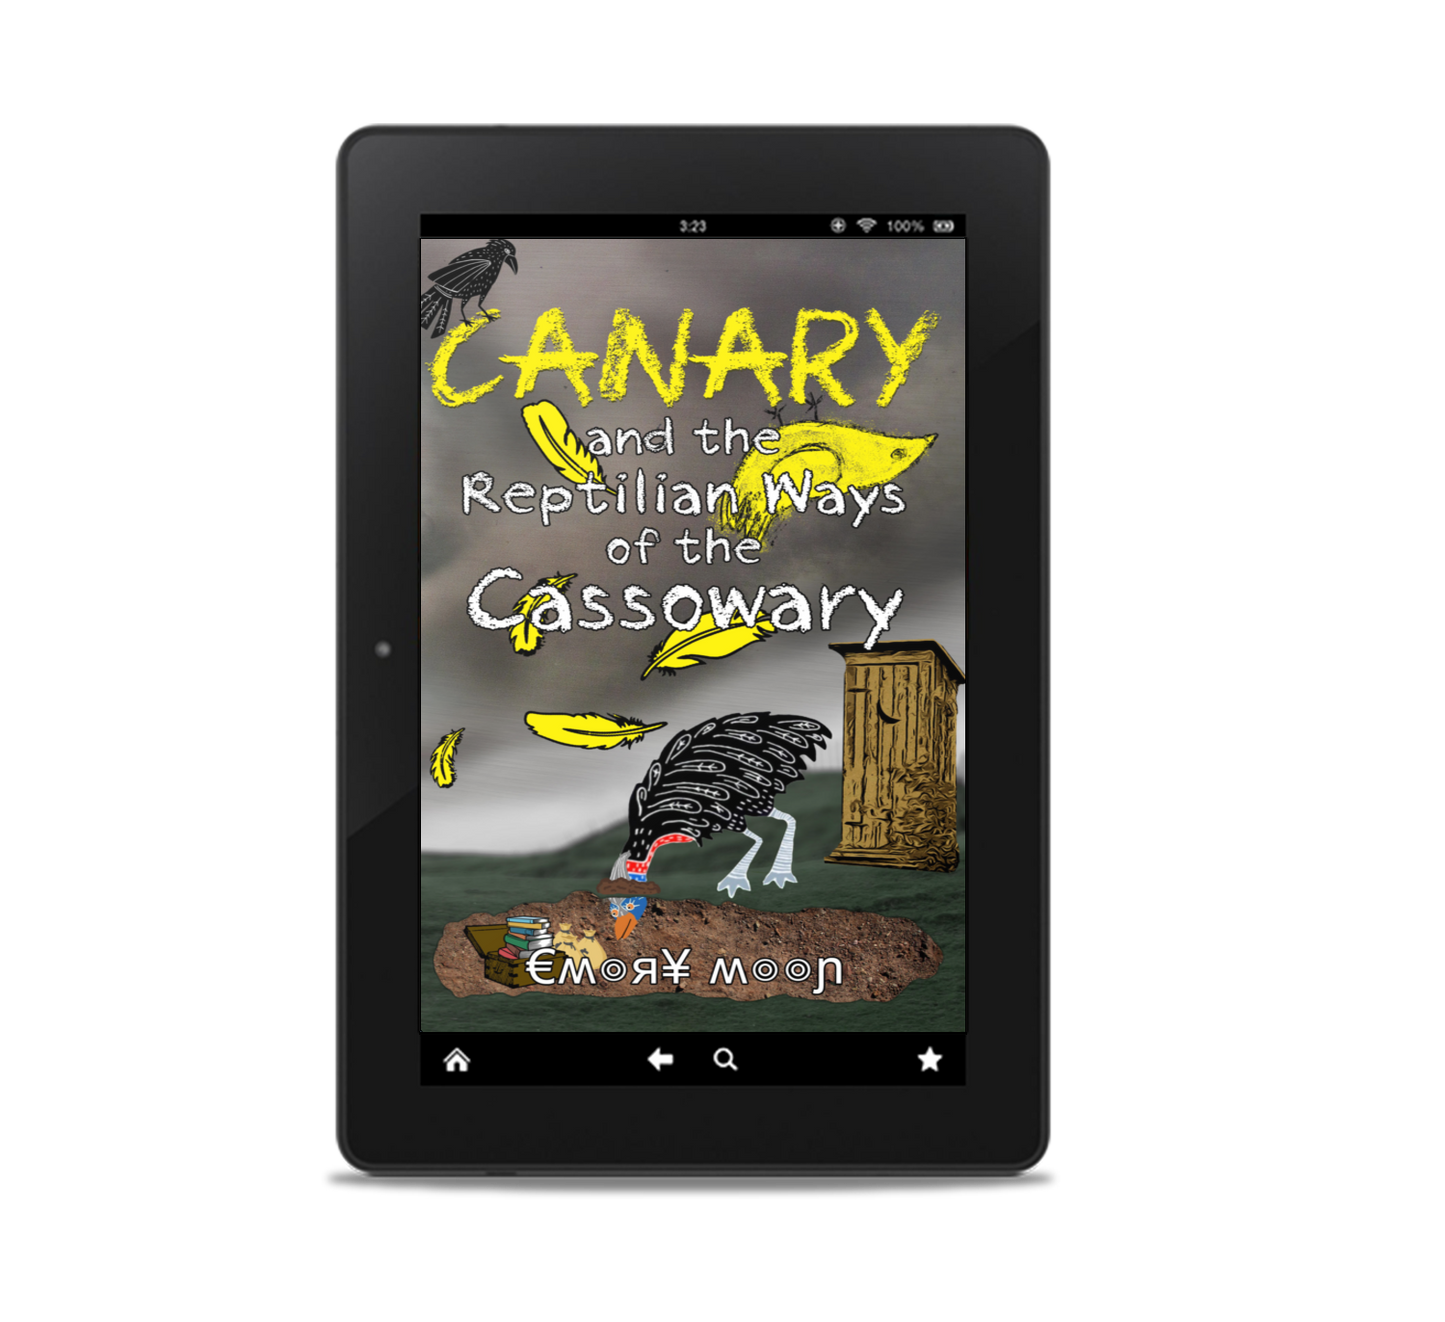 Canary and the Reptillian Ways of the Cassowary - (ebook future download) (Canary Trilogy Part-3) (discount-code: CASSOWARY for FREE future download)